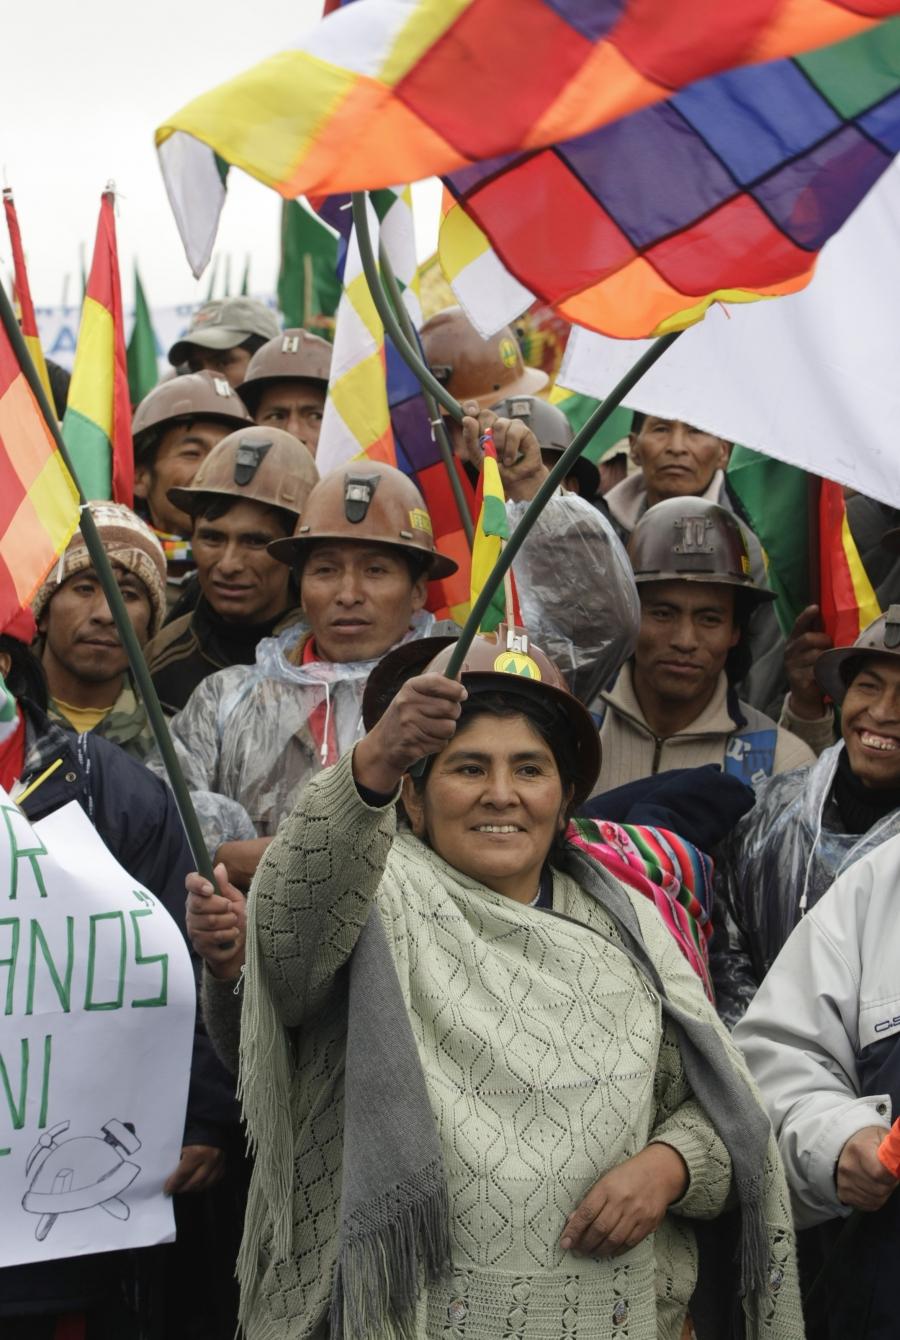 A Bolivian woman waves the Wiphala, the flag of native Andeans, while awaiting the arrival of President Evo Morales to enact the new constitution in a public gathering of thousands of his supporters, in El Alto on the outskirts of La Paz, February 7, 2009